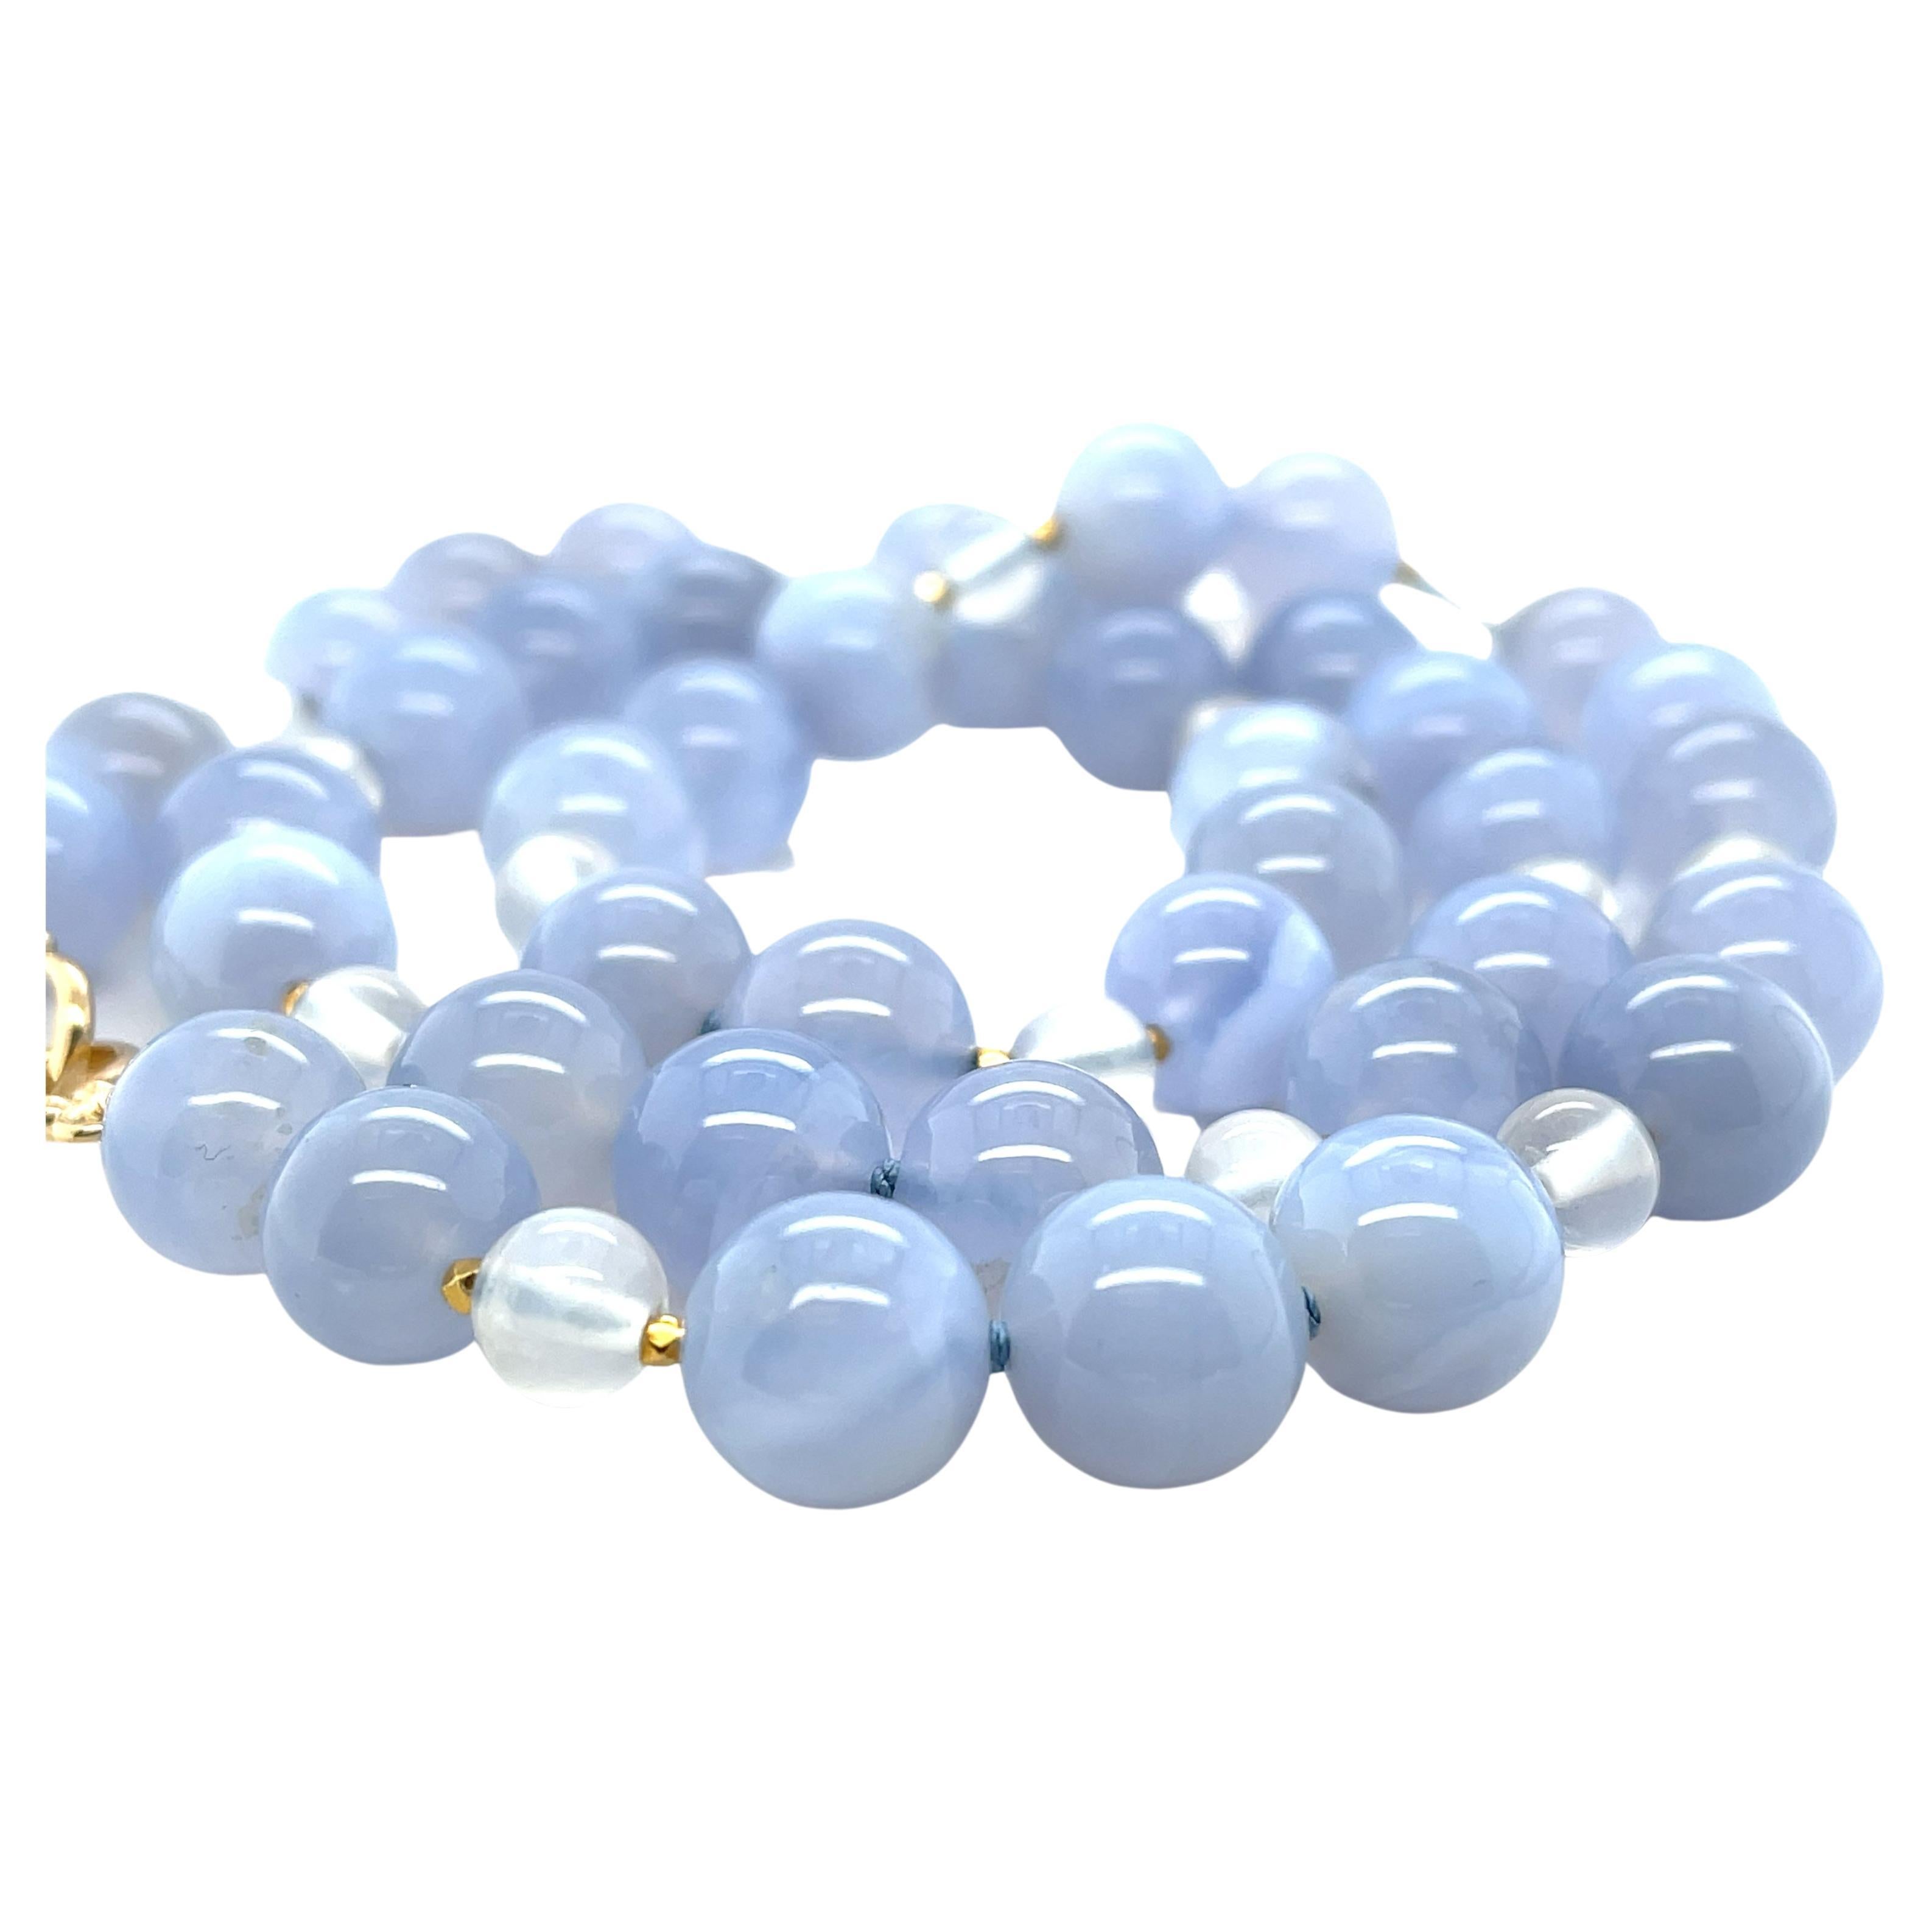 This pretty necklace pairs lovely, translucent 10mm blue chalcedony beads with adularescent blue moonstone for a look of unmistakably refined beauty. Perfect for wearing to the office, lunch with friends, or an elegant evening out! Hand strung on